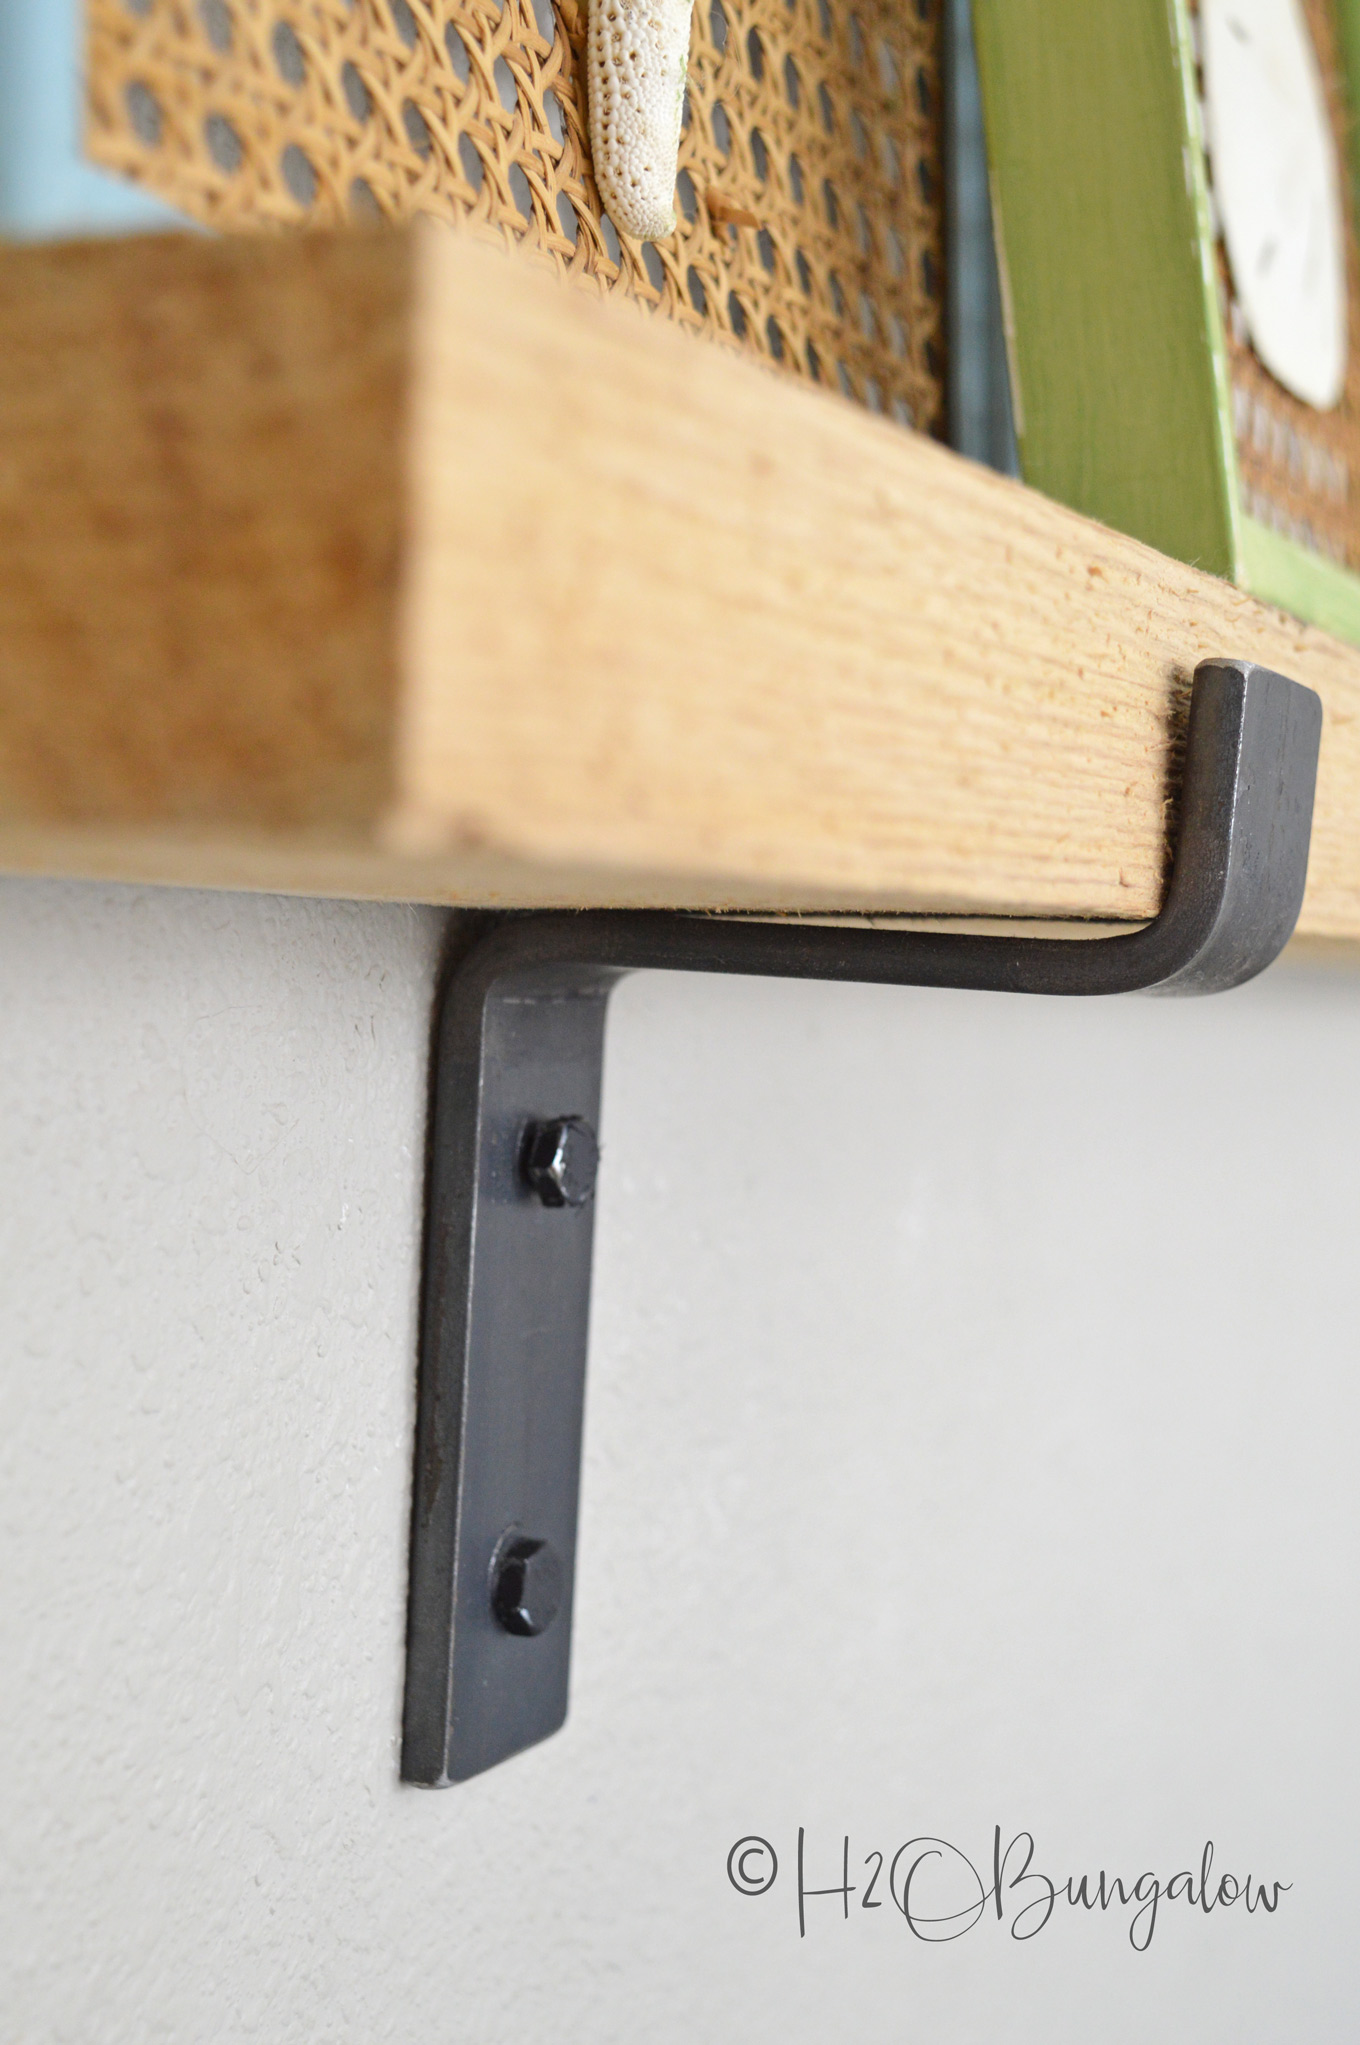 Tutorial on how to make a rustic modern DIY picture ledge and where to find the chunky industrial hardware.  Plus, simple step by step instructions on how to hang level picture ledges. Part 1 of 2, next learn how to create and style a wall vignette with picture ledges.